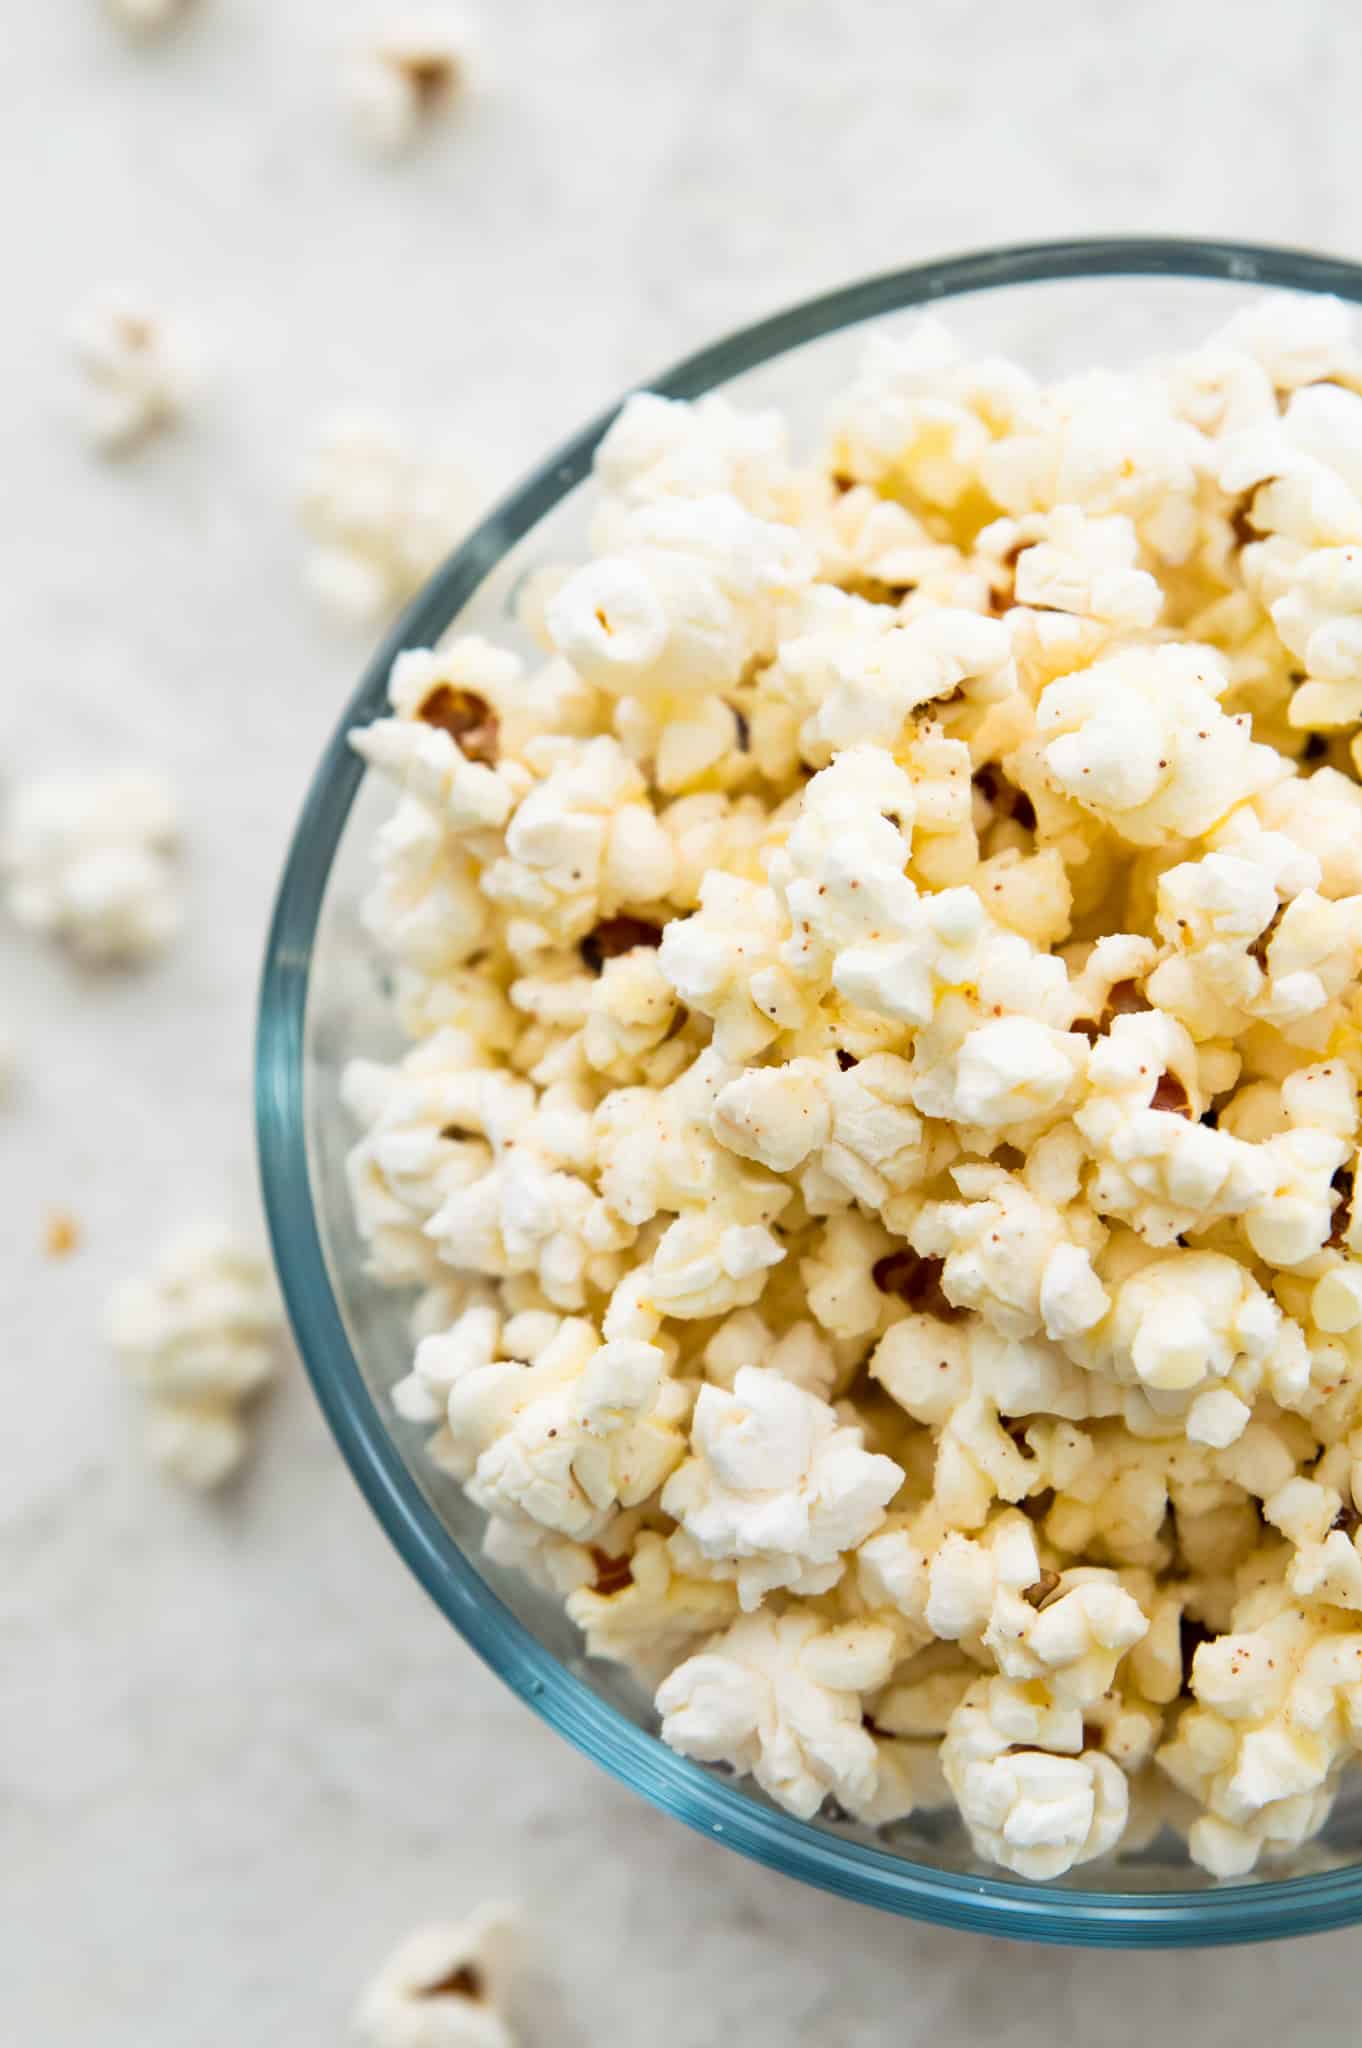 A large bowl of cooked popcorn.